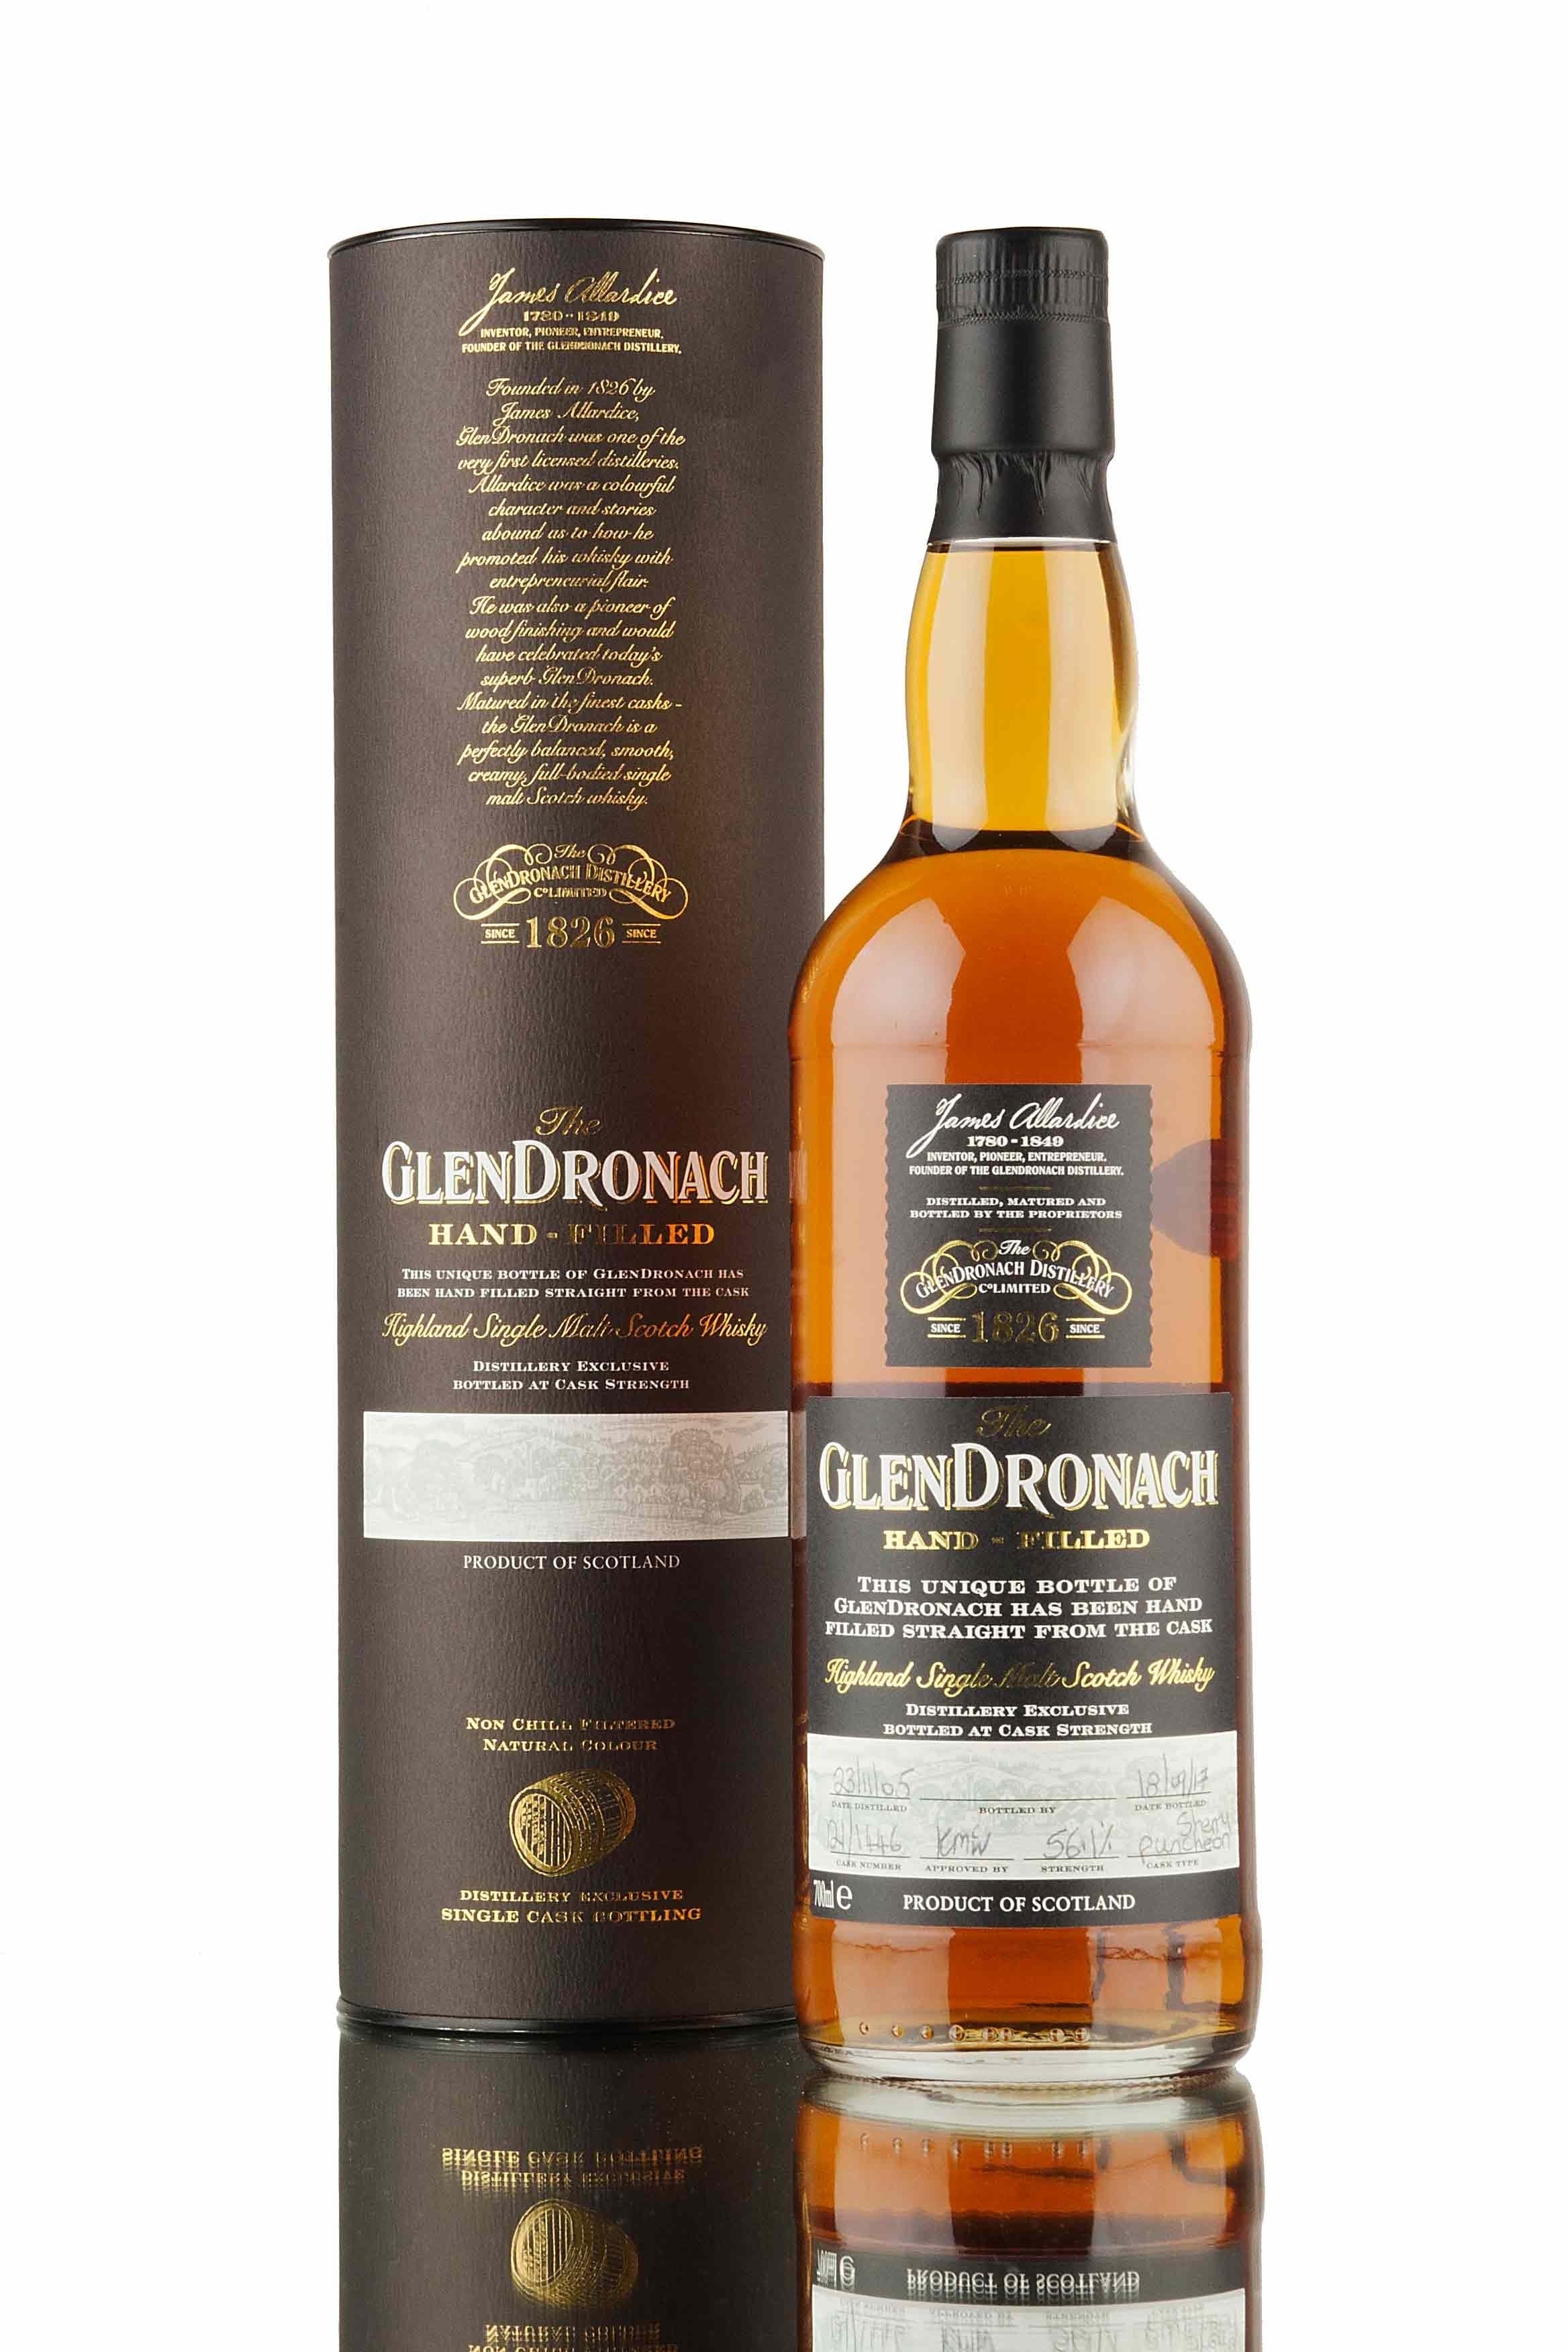 GlenDronach 11 Year Old - 2005 | Cask 1446 | Hand-Filled